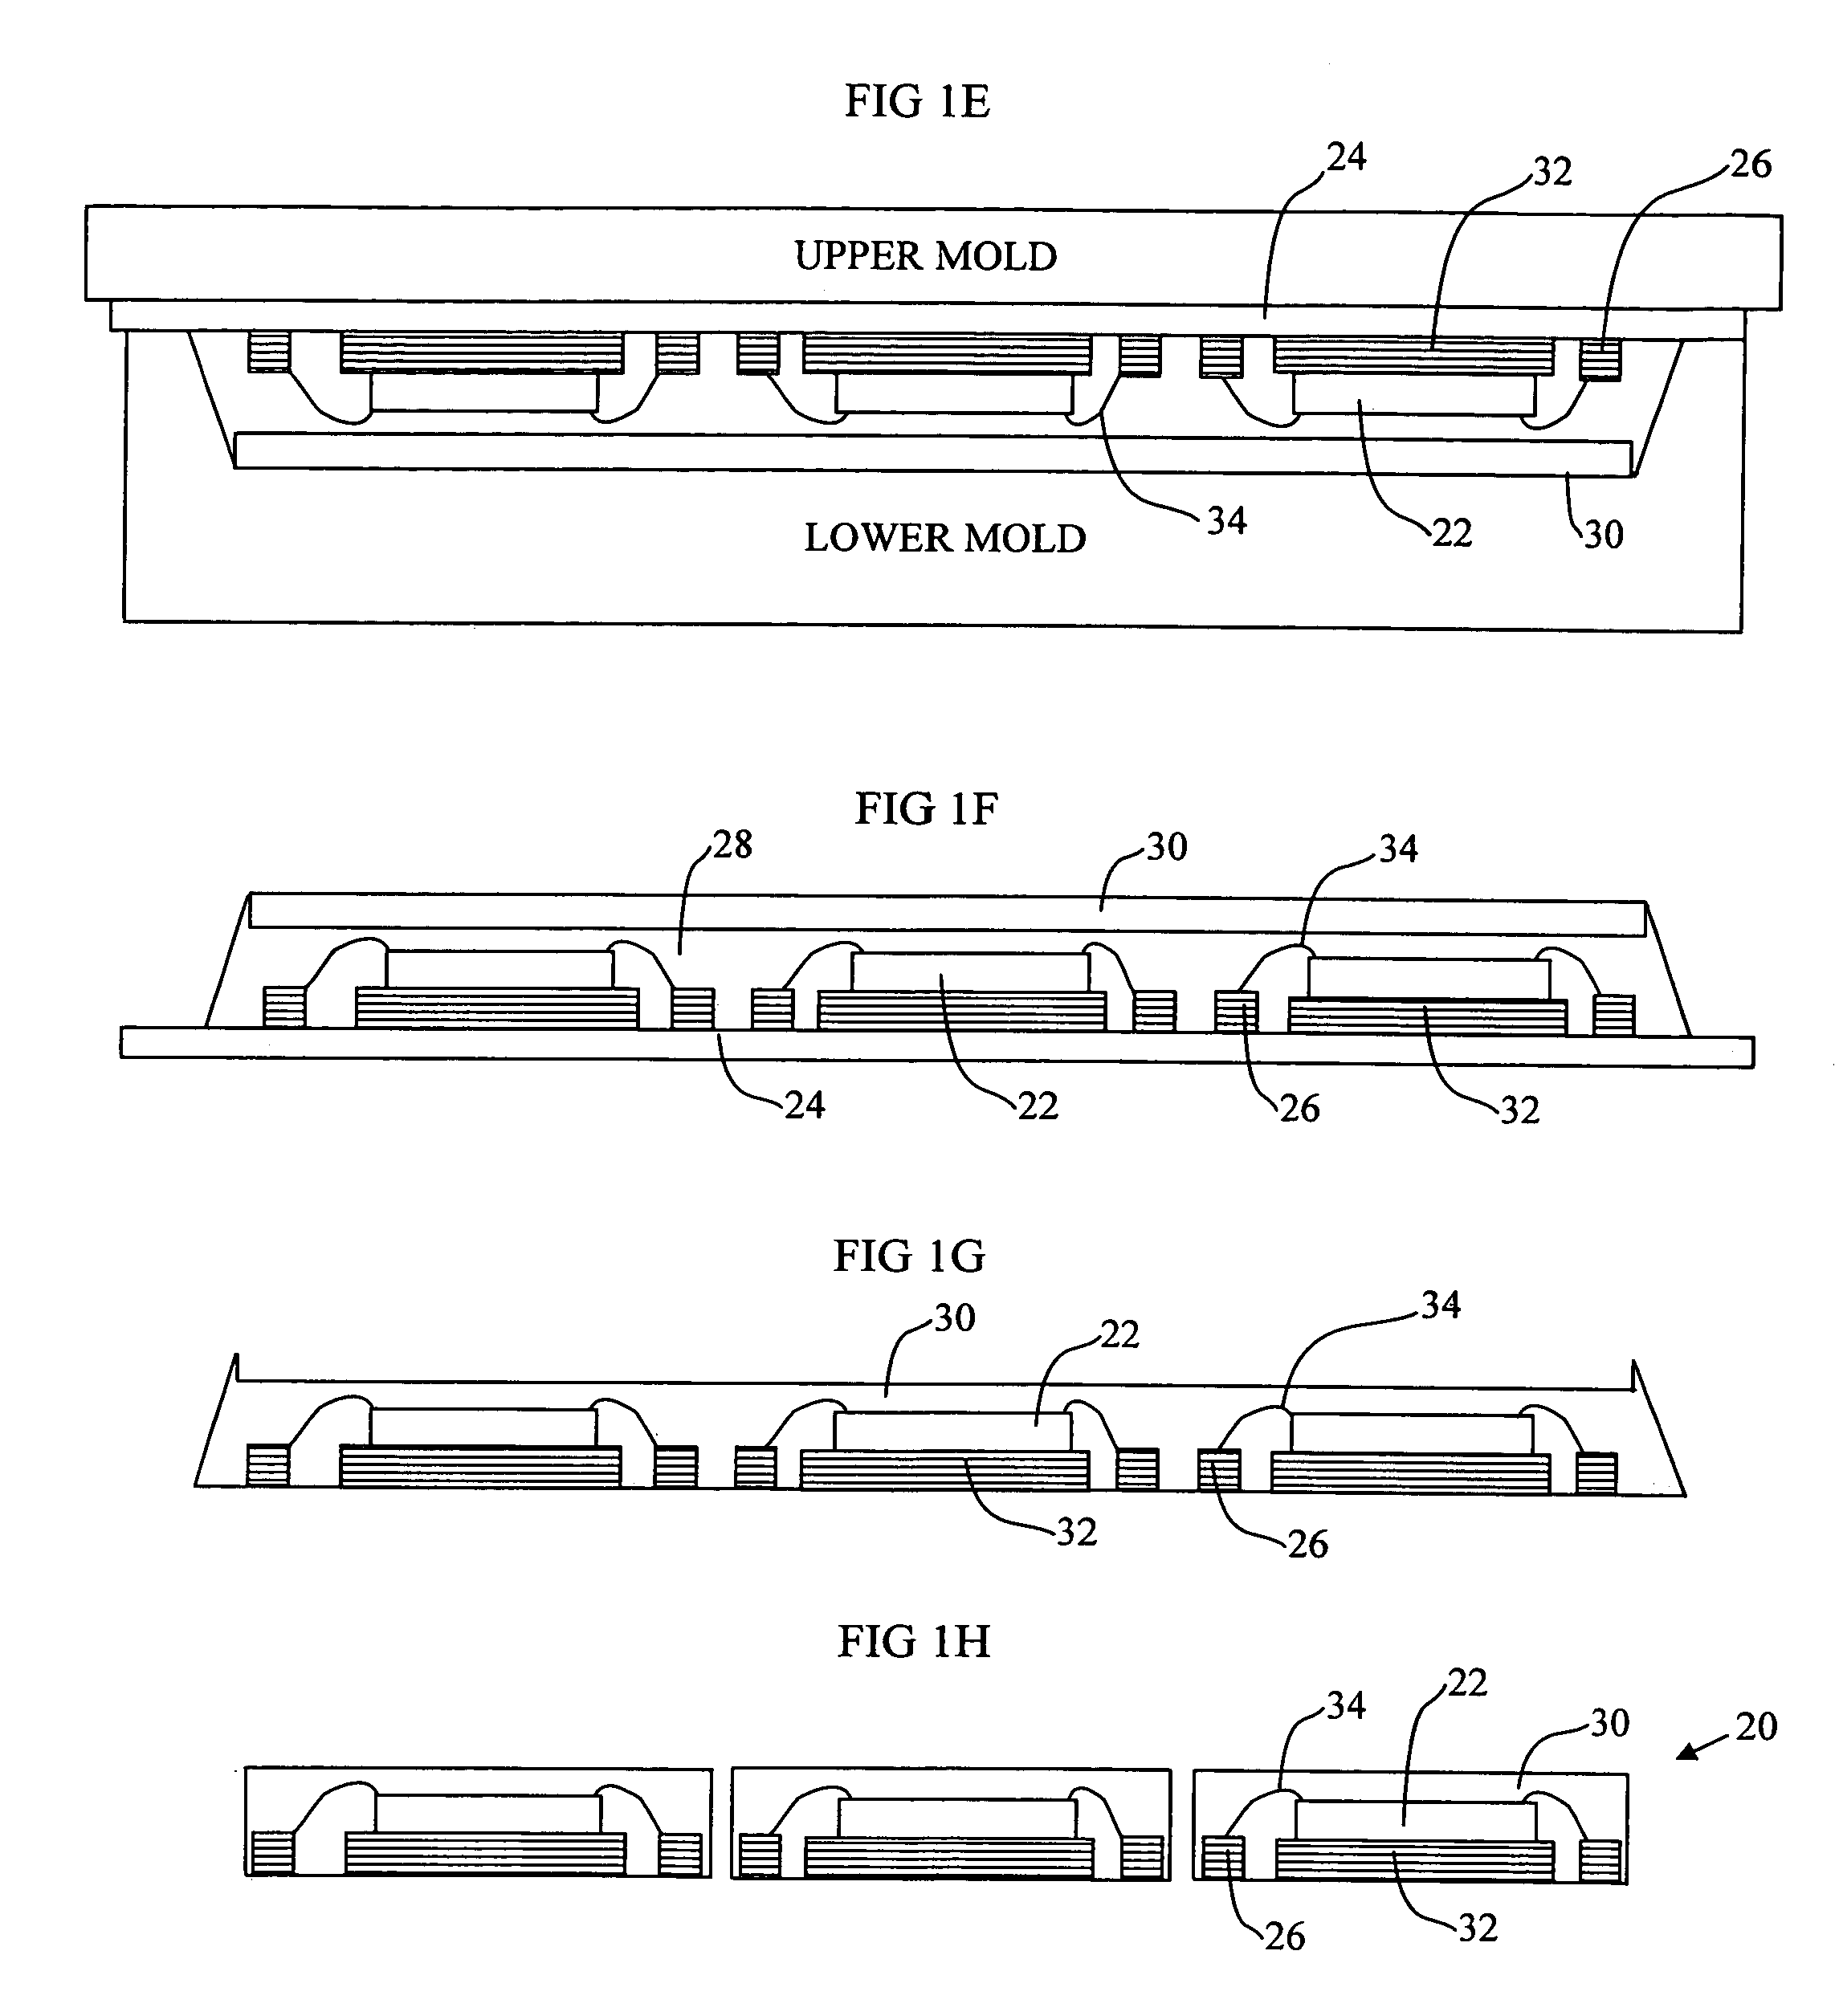 Process for fabricating an integrated circuit package with reduced mold warping